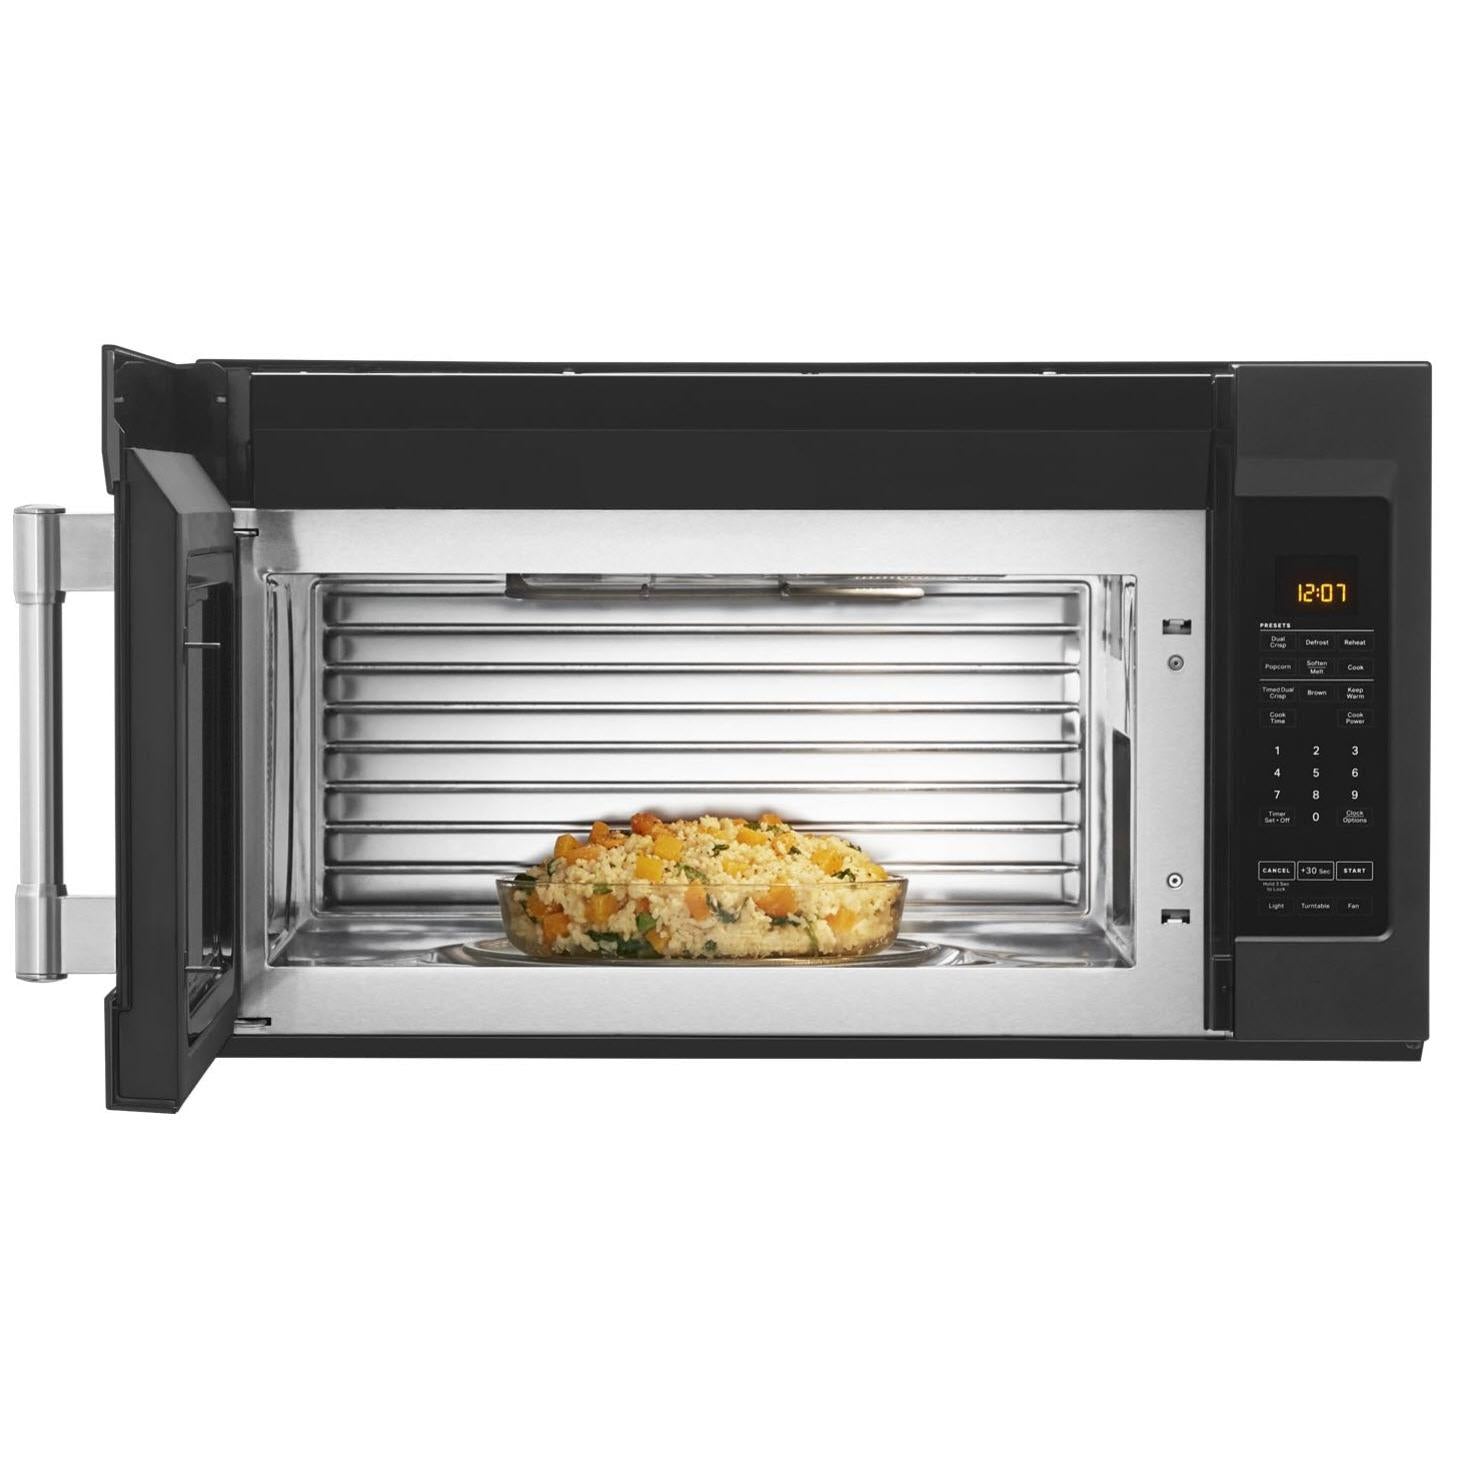 Maytag 30-inch, 1.9 cu.ft. Over-the-Range Microwave Oven with Stainless Steel Interior MMV5227JK